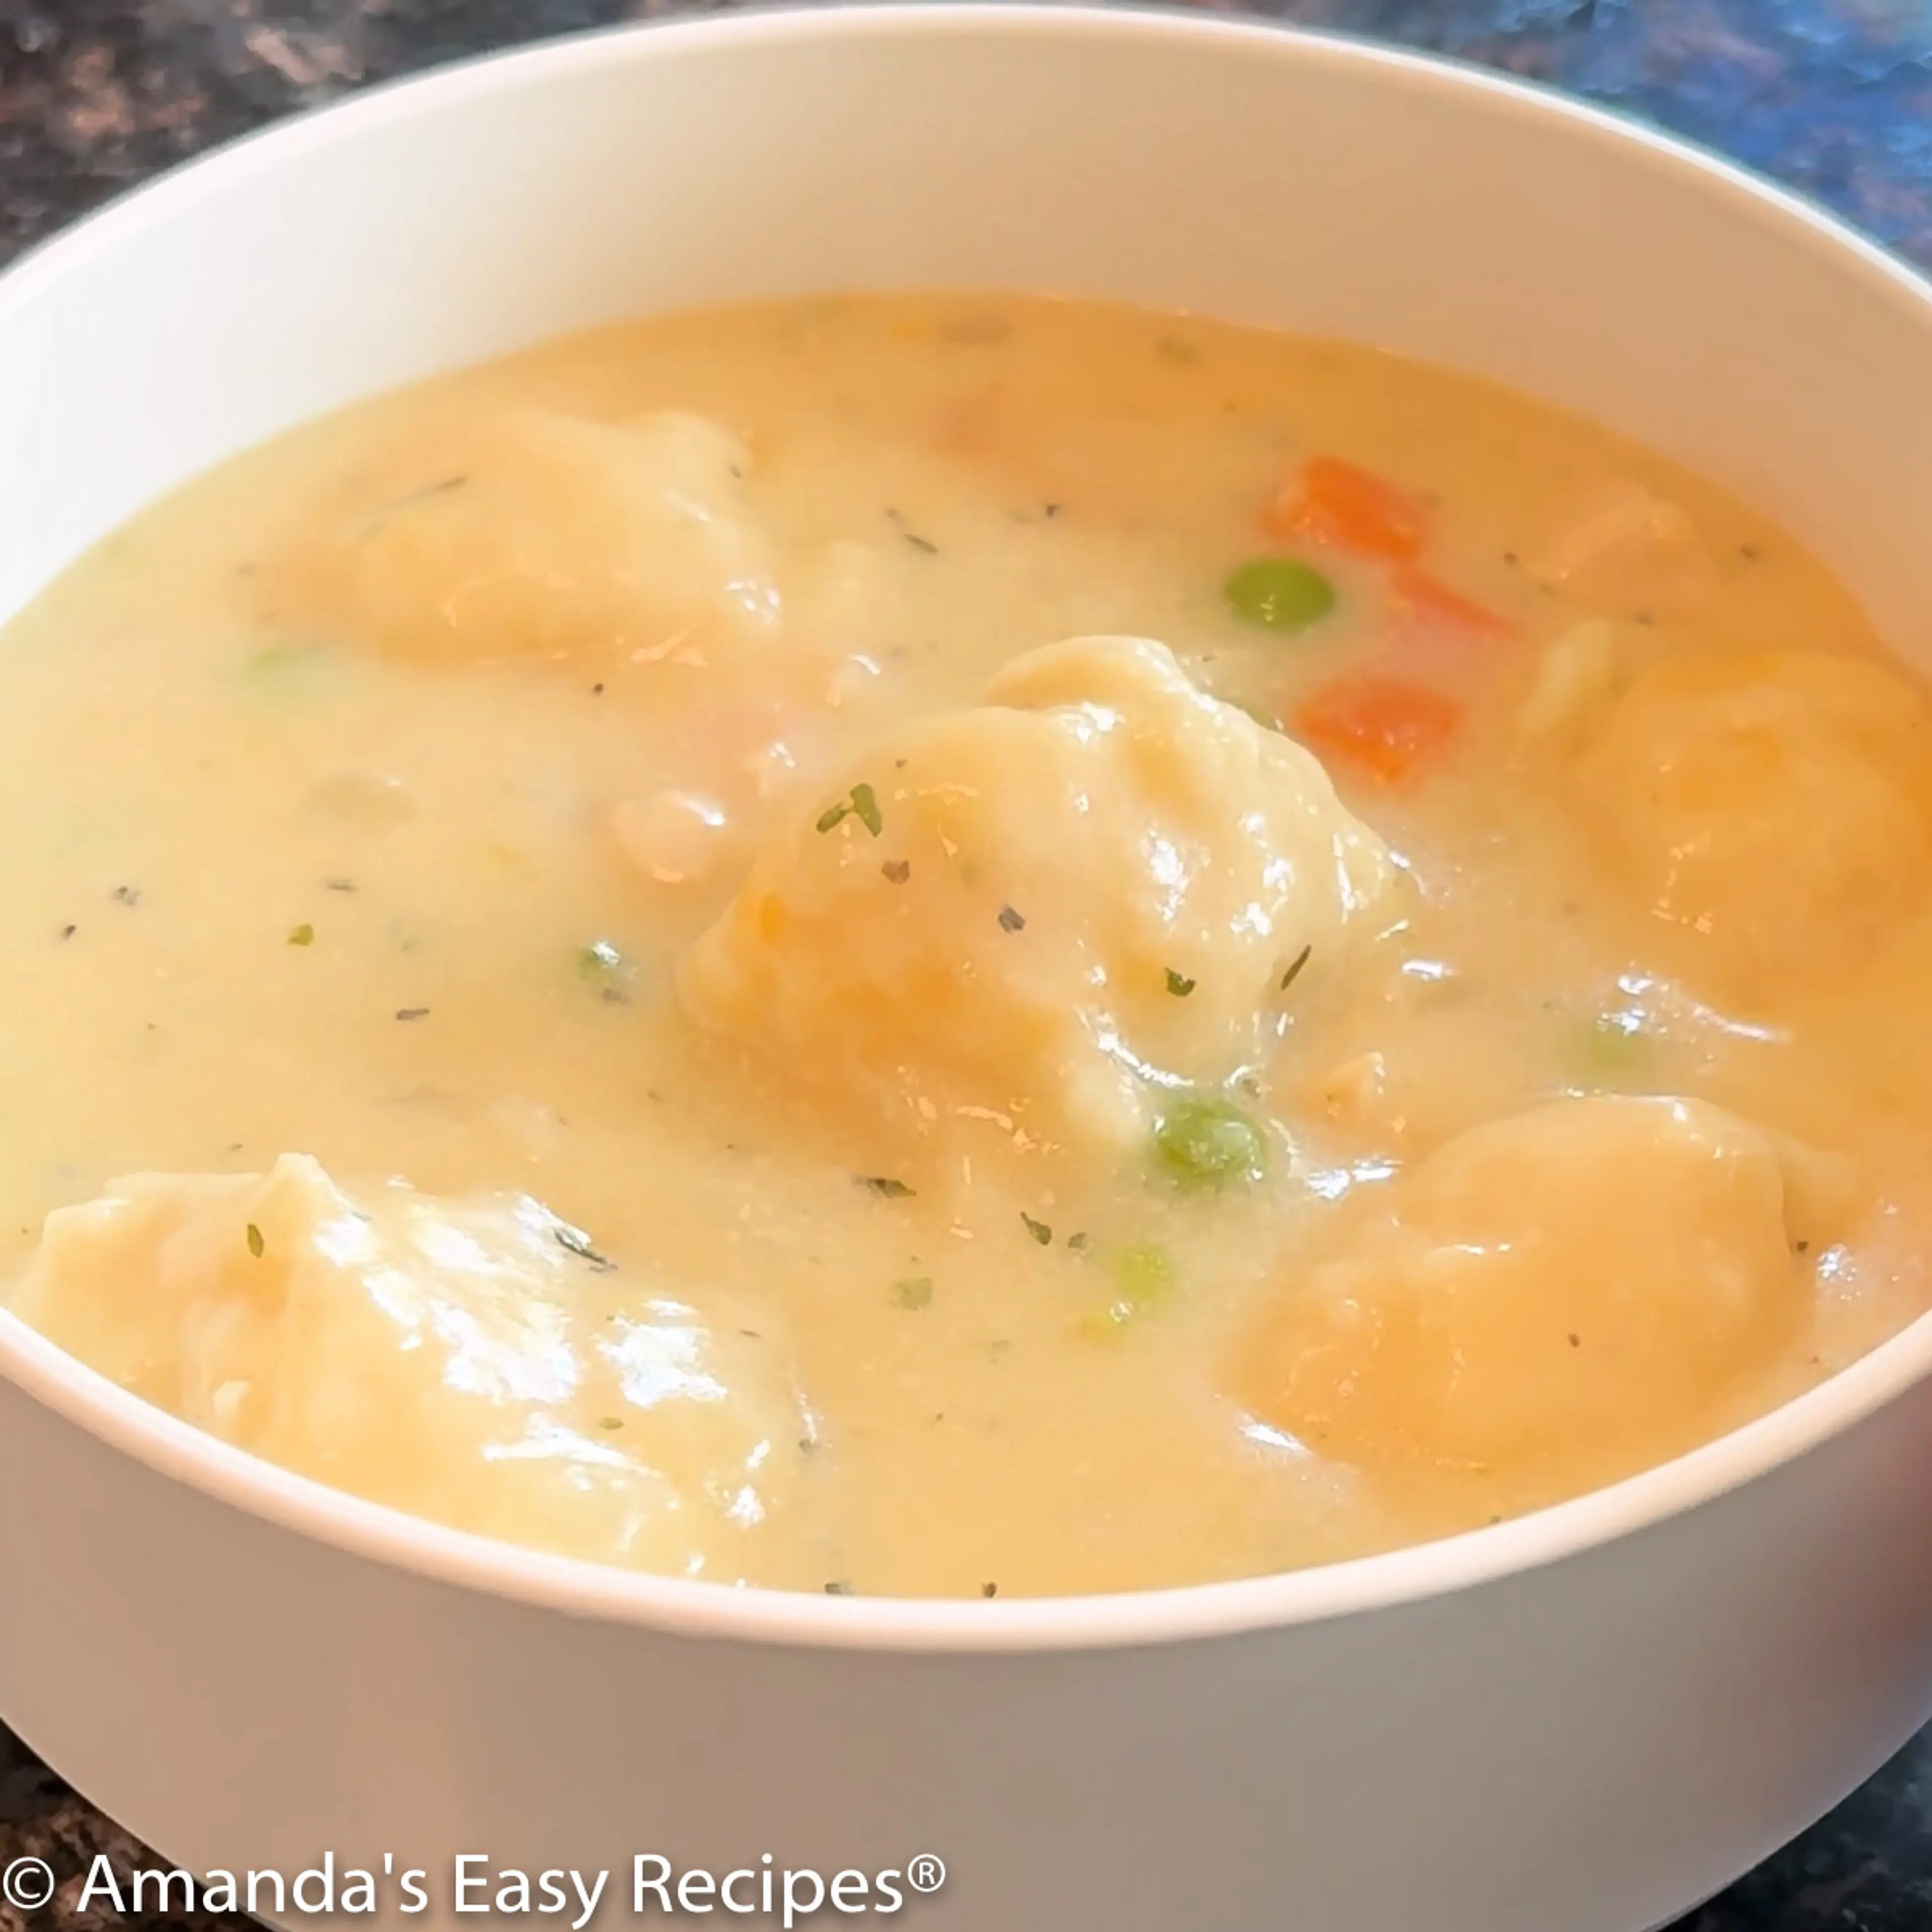 Chicken and Dumplings made with Cheddar Bay Biscuits Recipe